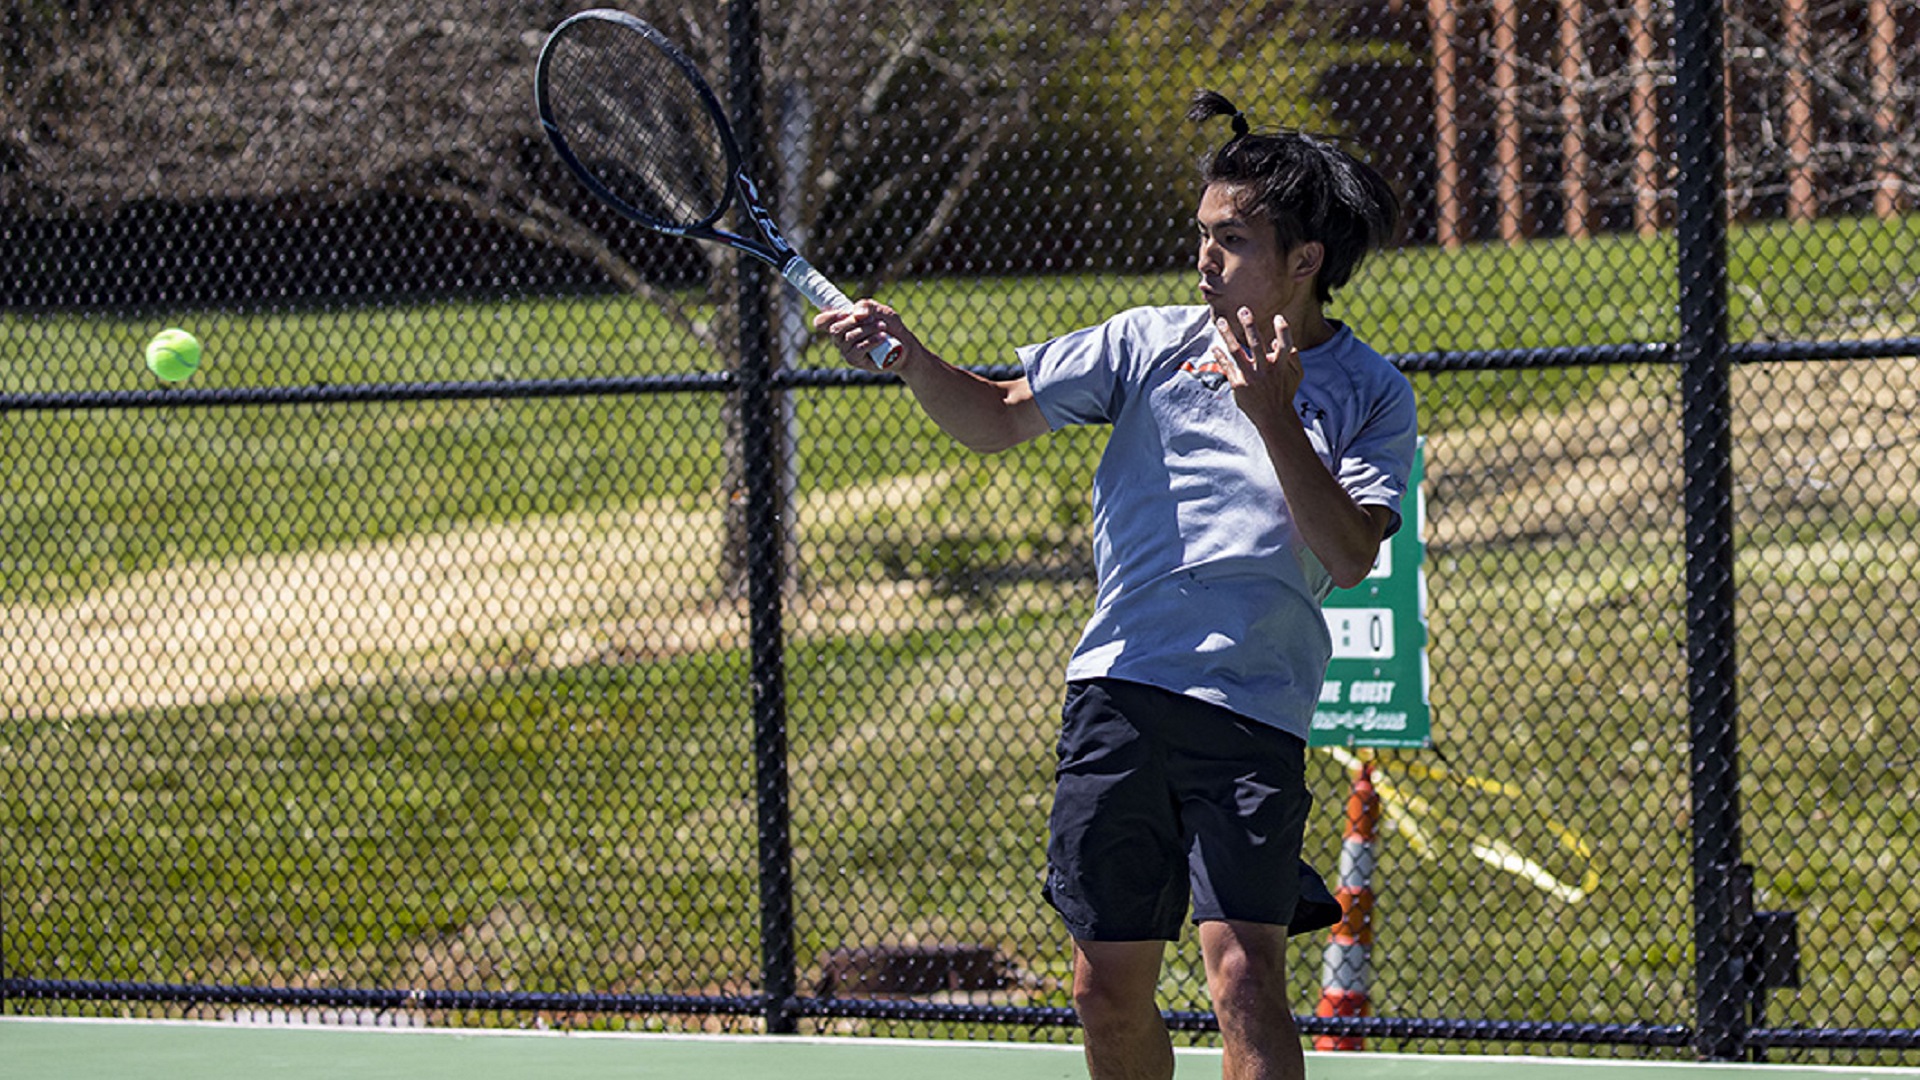 Pioneers move to SAC semifinals with 4-1 win over Lenoir-Rhyne